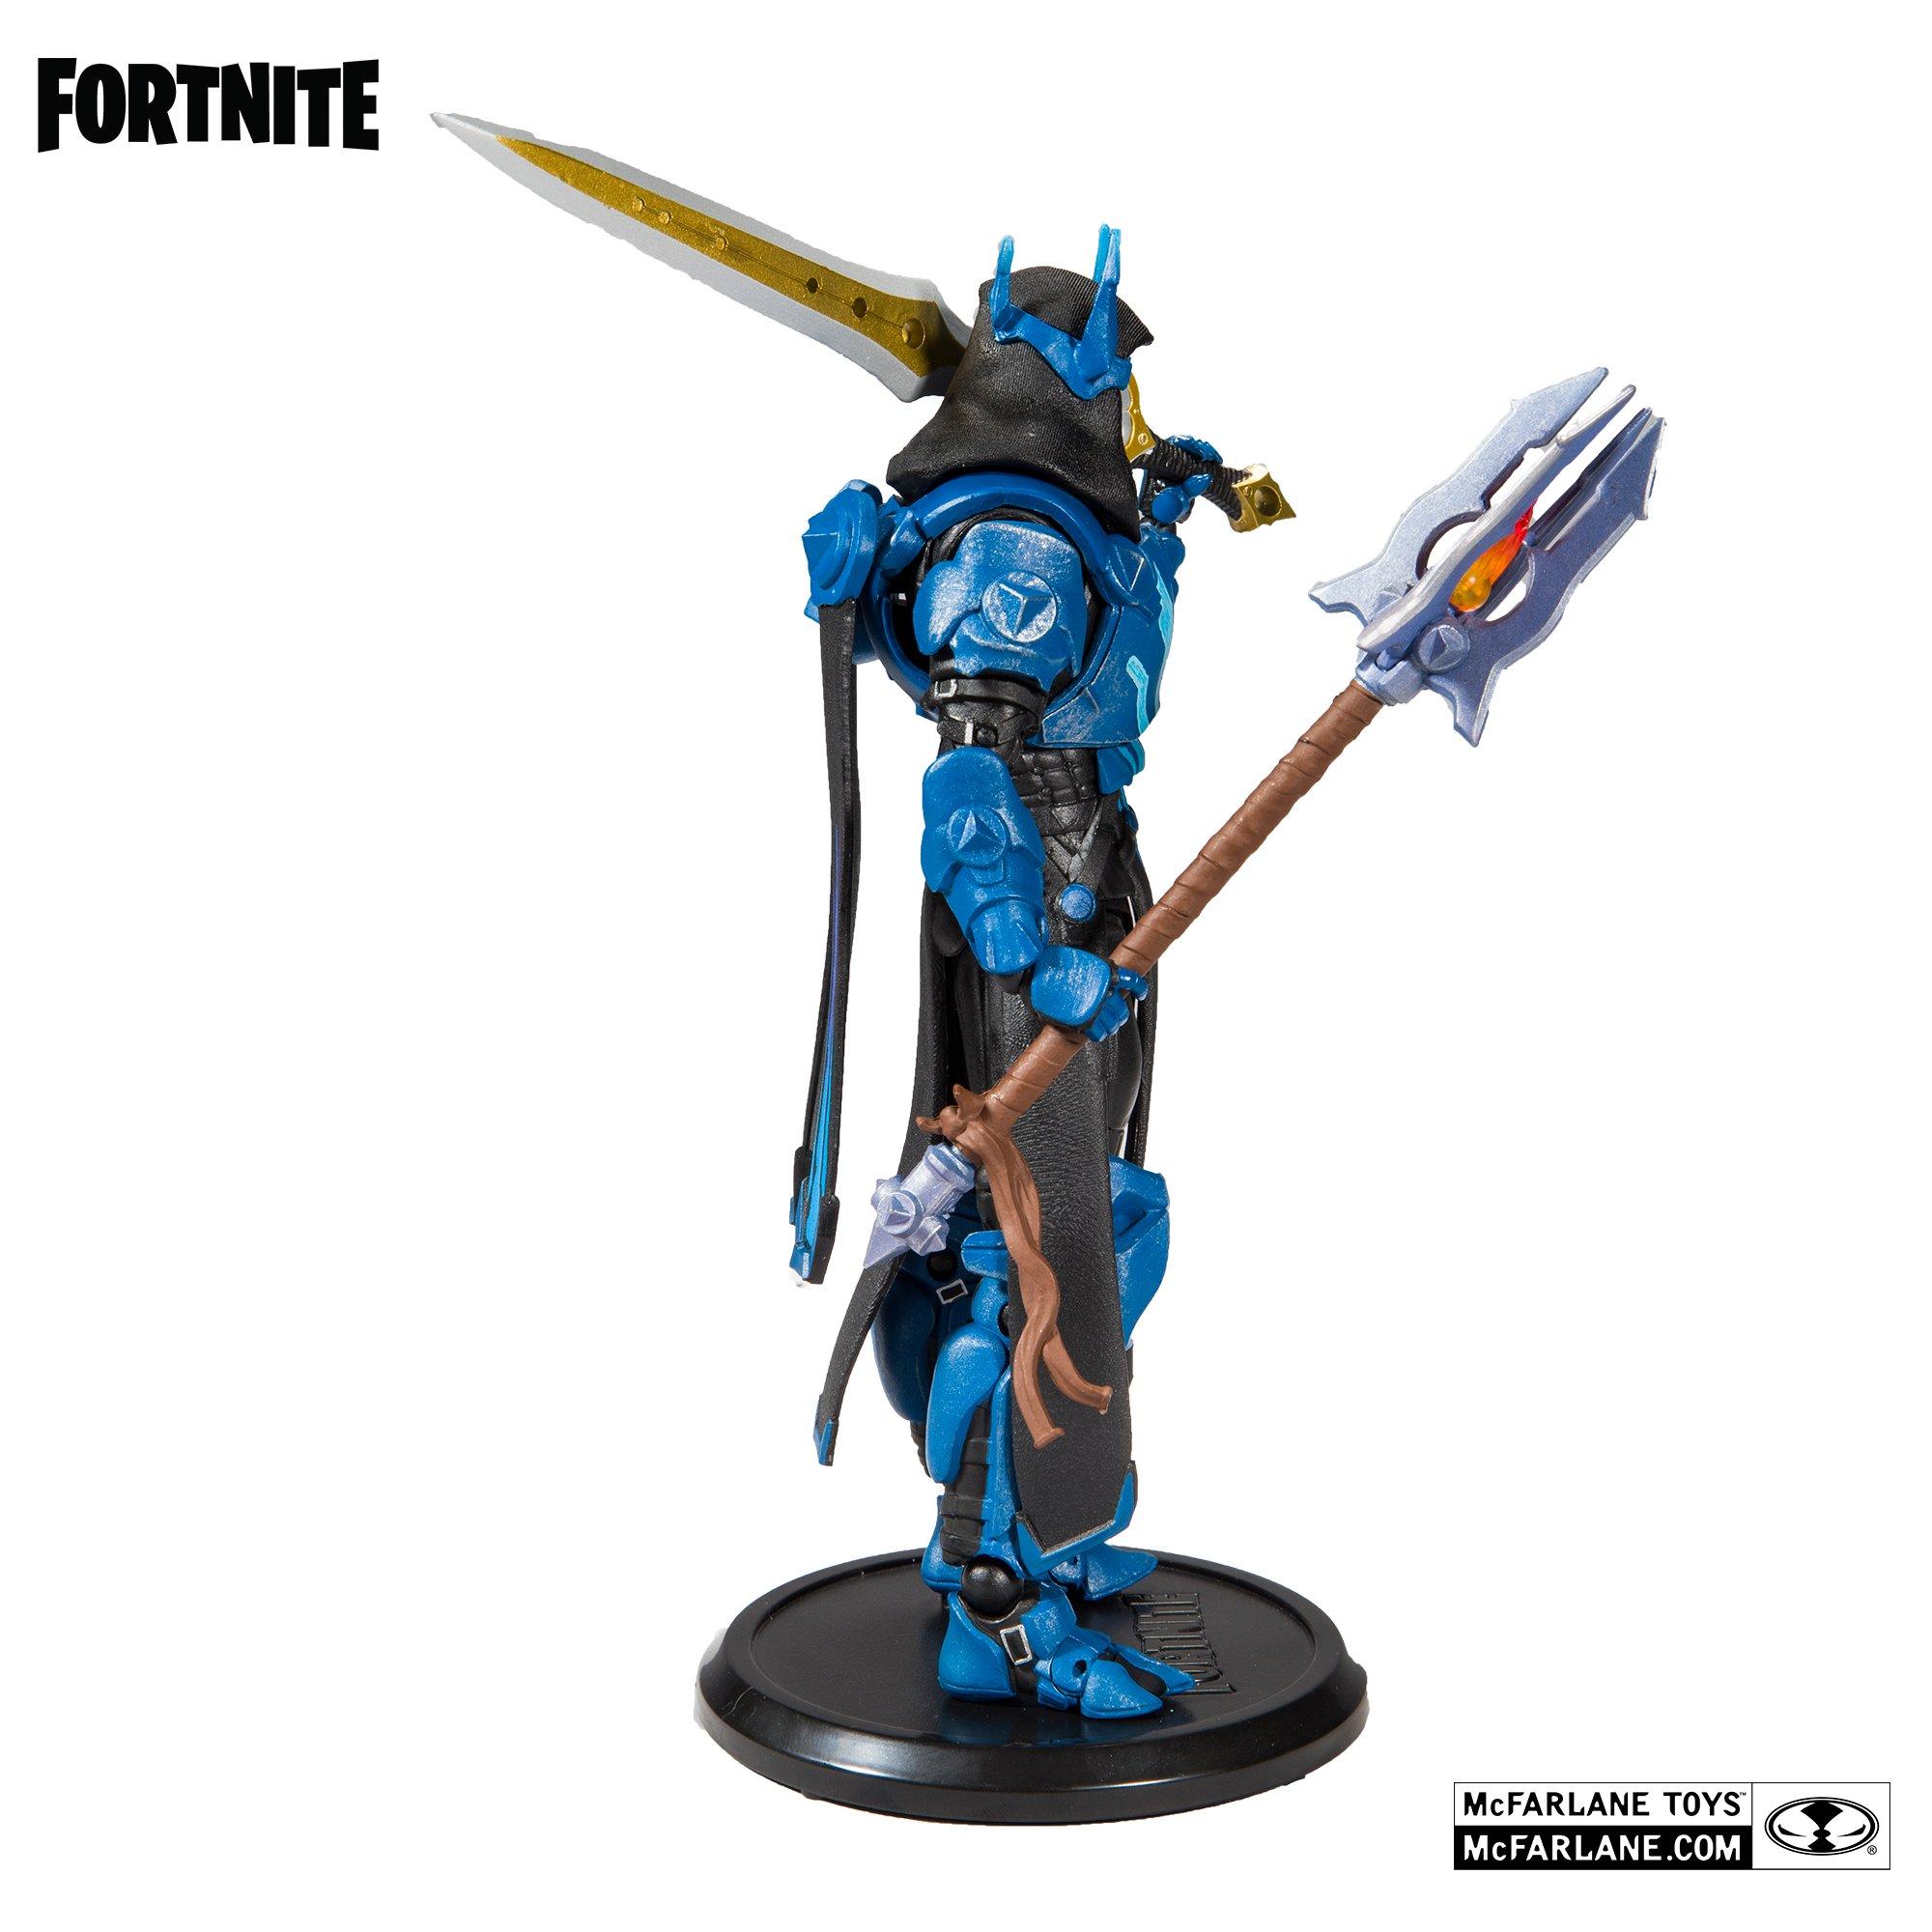 Fortnite The Ice King Action Figure | GameStop